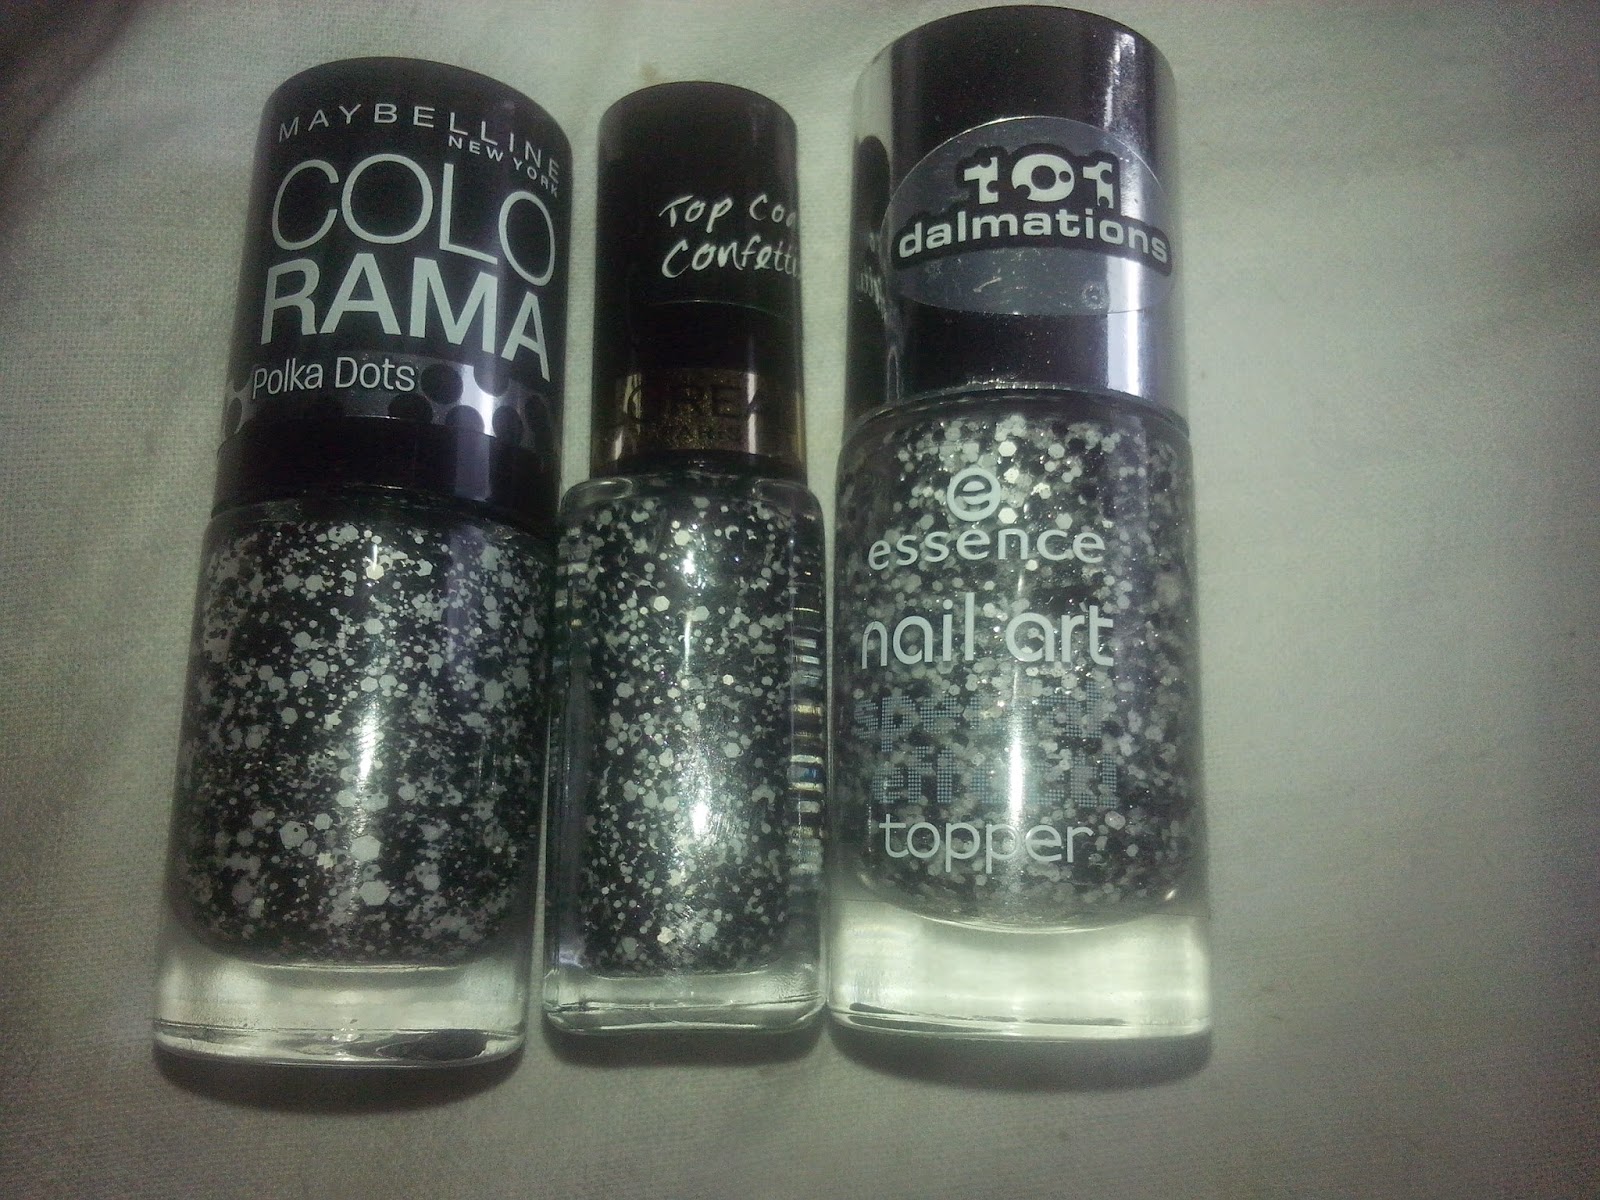 comparisson-exxence-black-dress-white-tie-maybelline-clearly-spotted-loreal-confettis